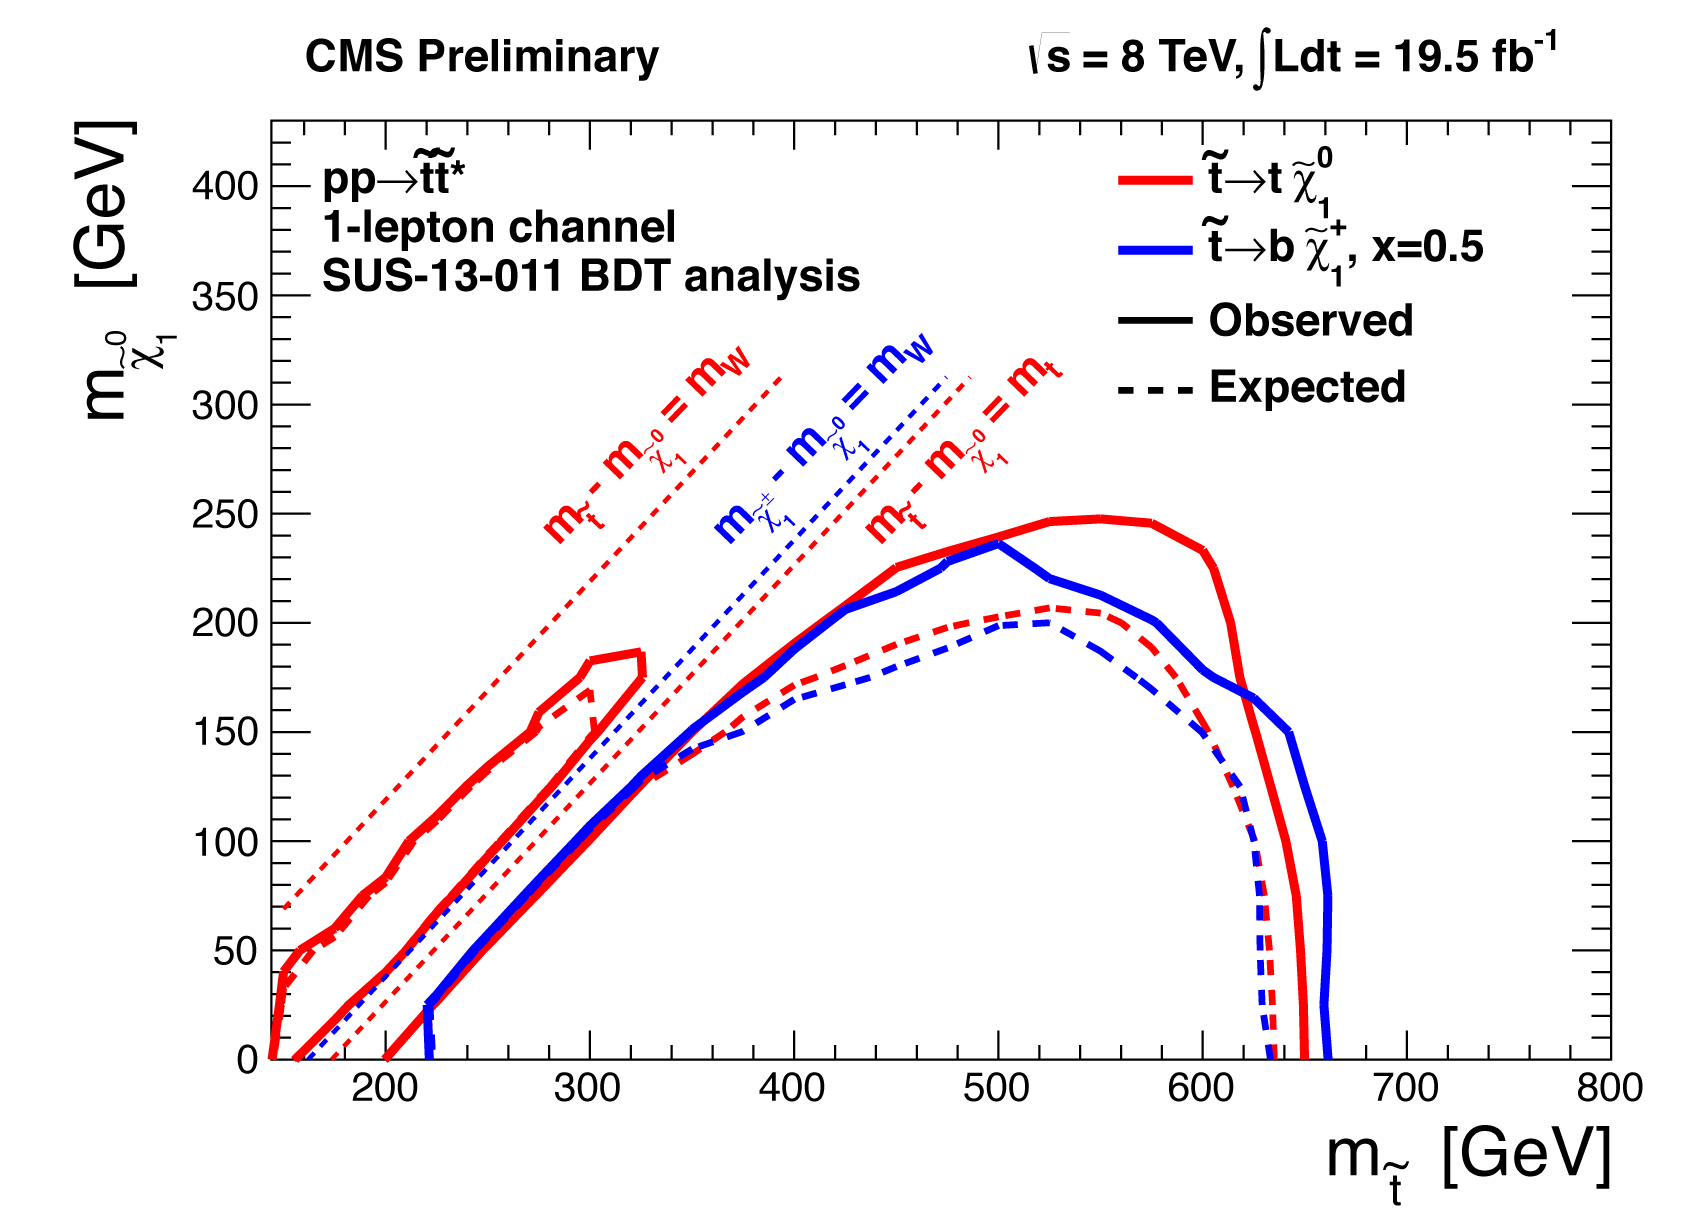 Image 1: Range of stop and neutralino masses probed by the search for direct stop pair-production in the single-lepton decay mode (SUS-13-011). The combinations of stop and neutralino masses inside the contours are excluded by the experimental results. The red contour assumes that the stop decays to a top quark and a neutralino, the blue contour assumes that the stop decays to a bottom quark and a chargino.